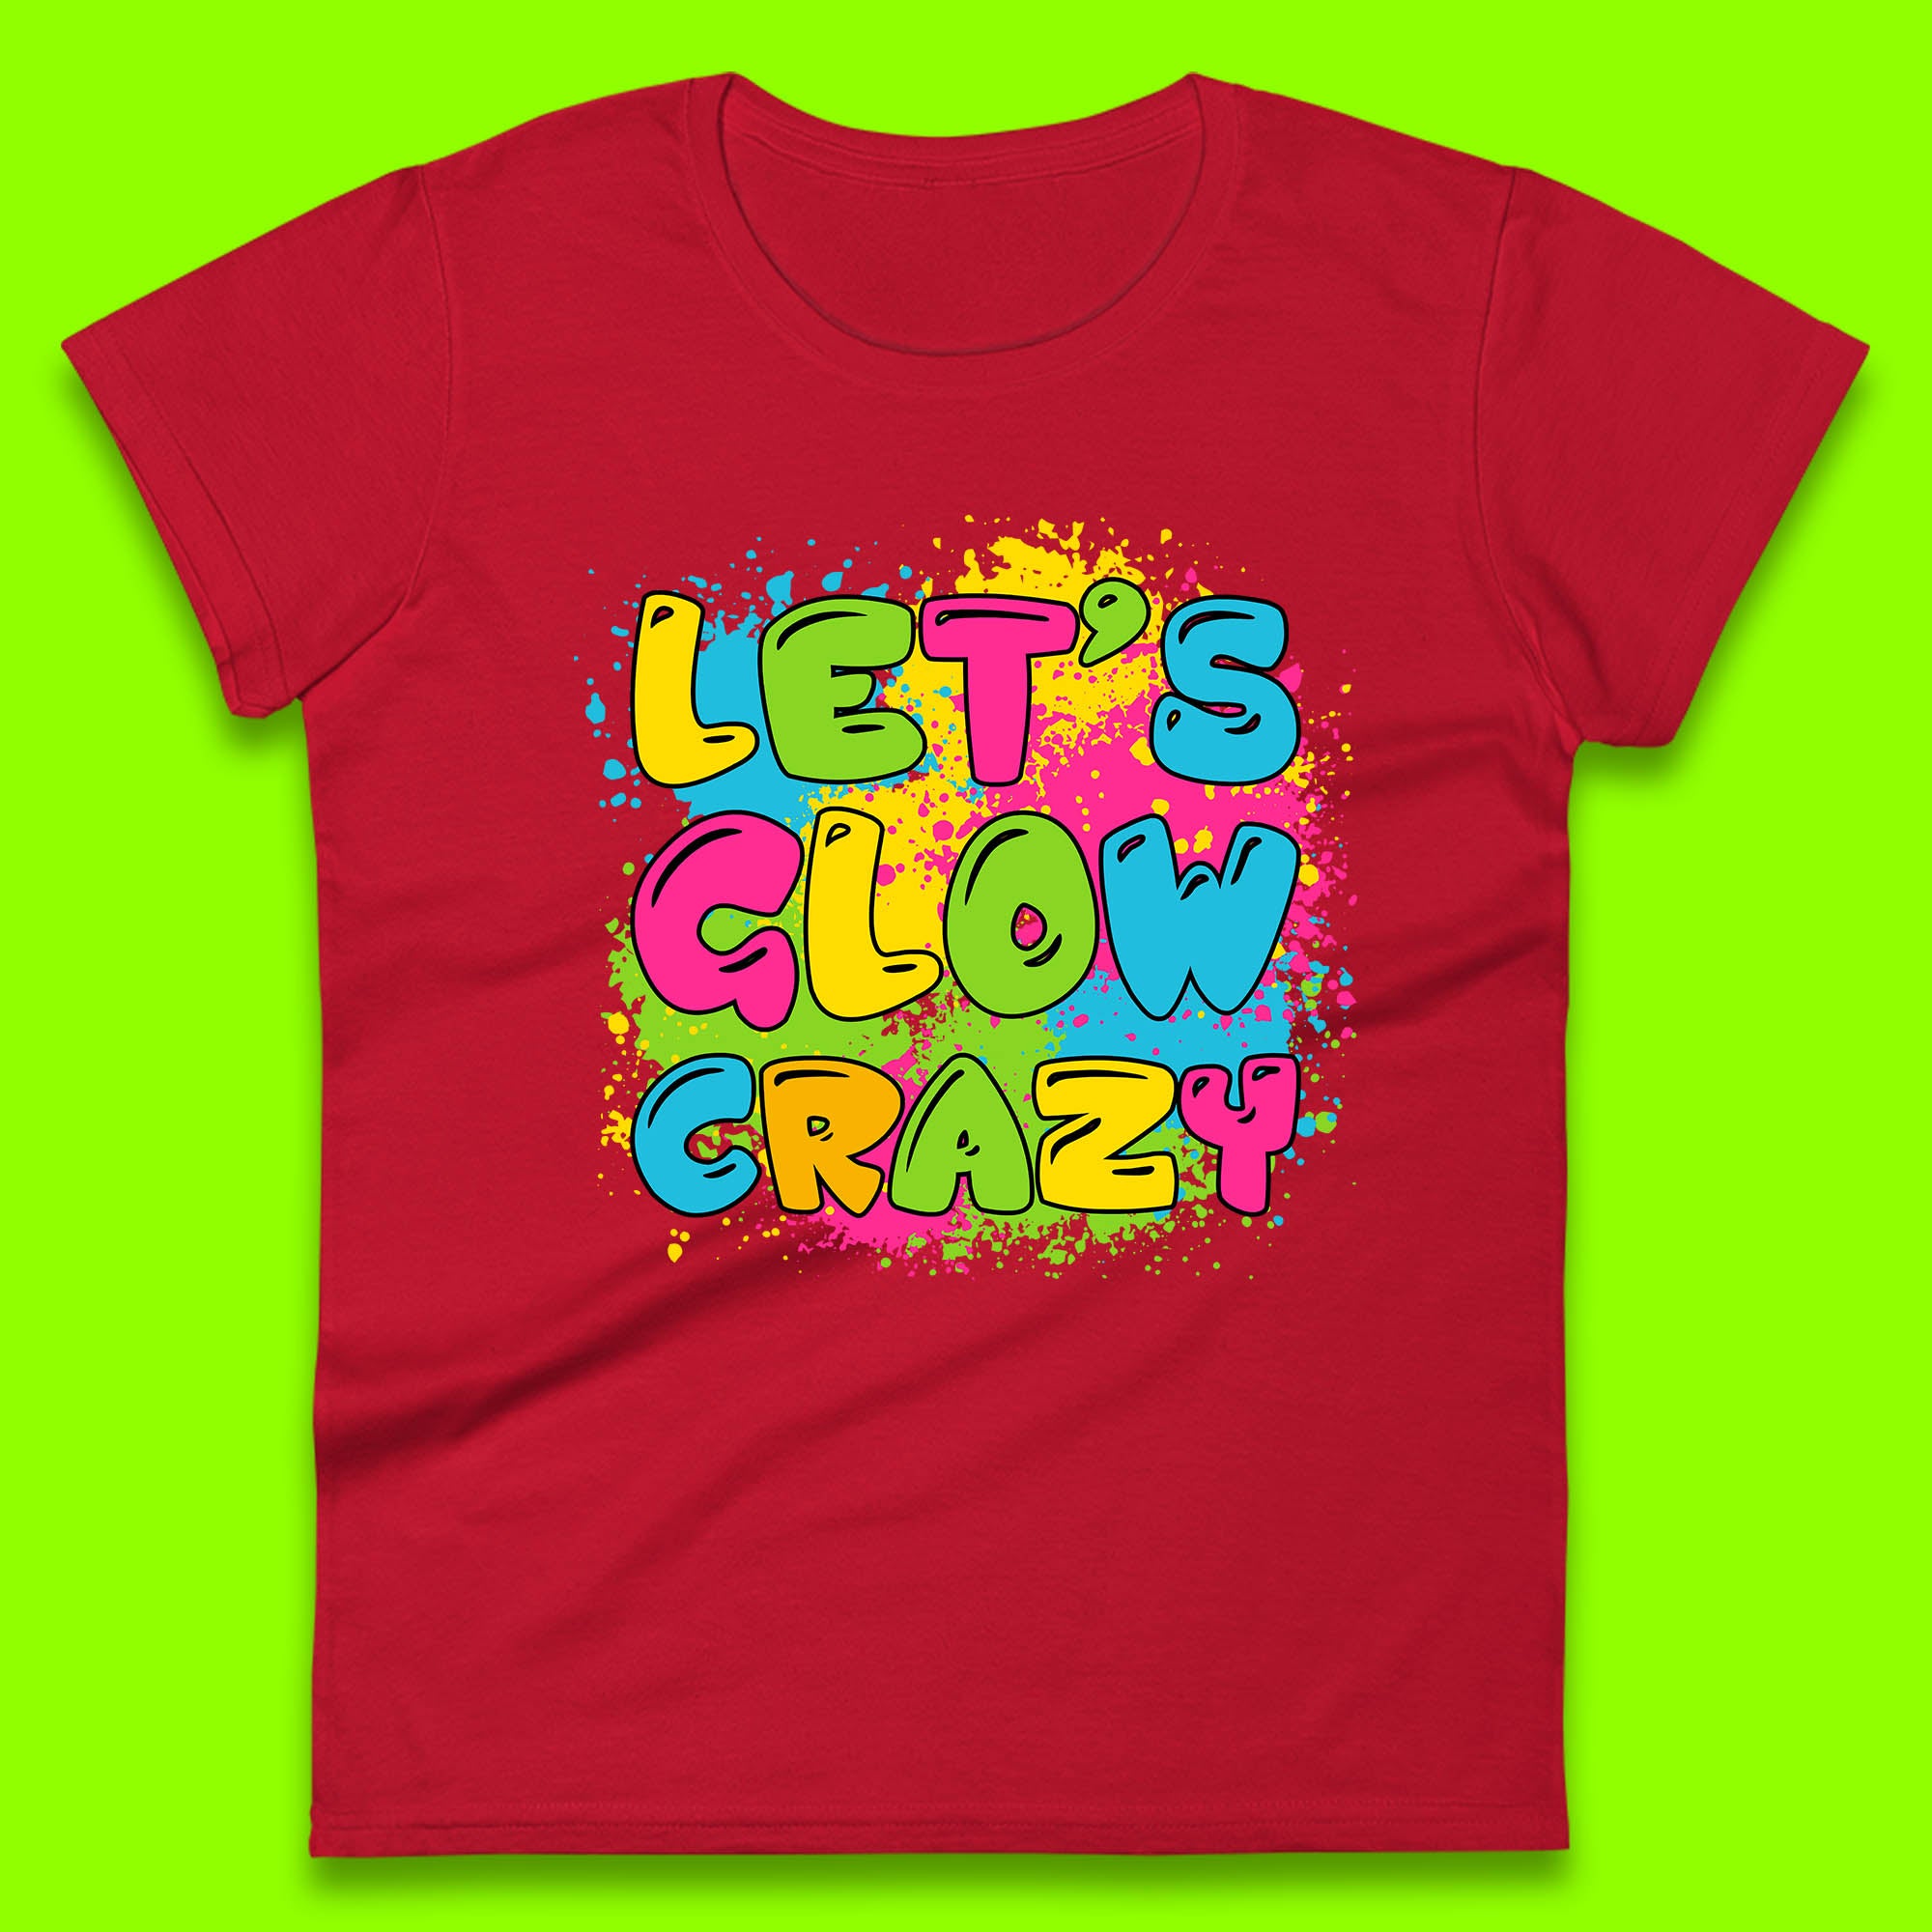 Let's Glow Crazy Paint Splatter Glow Birthday Retro Colorful Theme Party Womens Tee Top